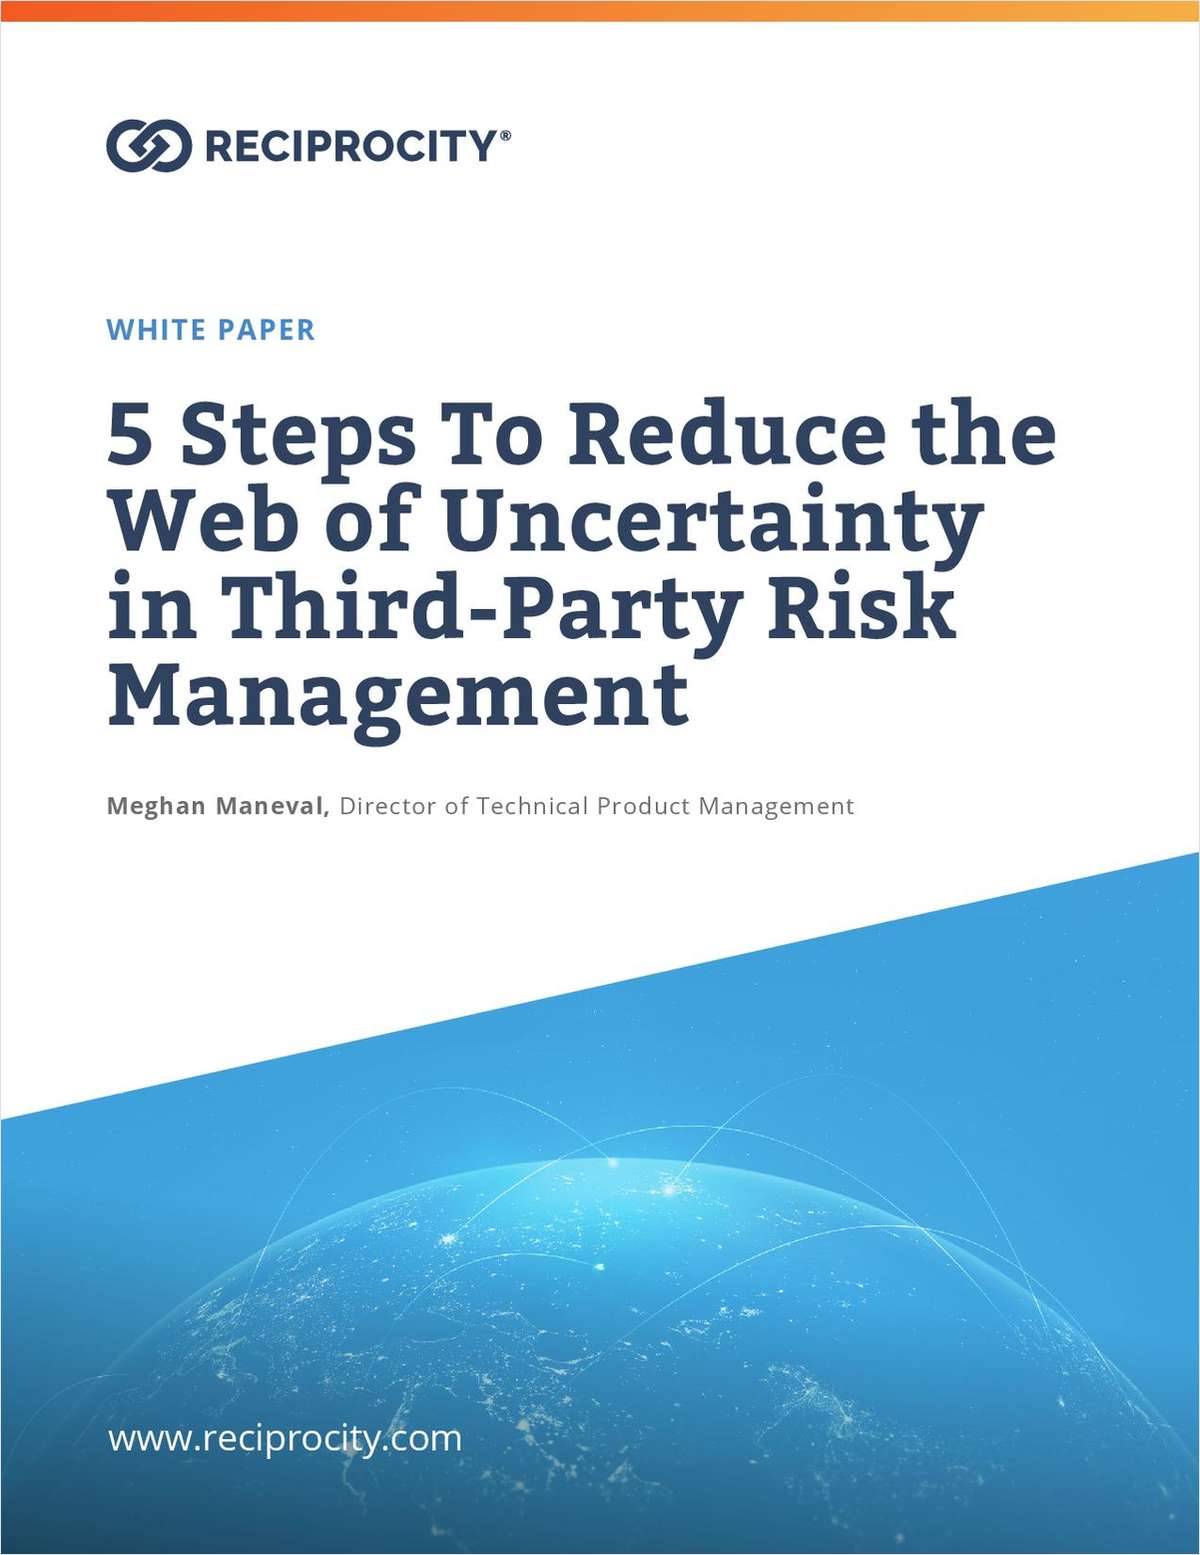 5 Steps To Reduce the Web of Uncertainty in Third-Party Risk Management